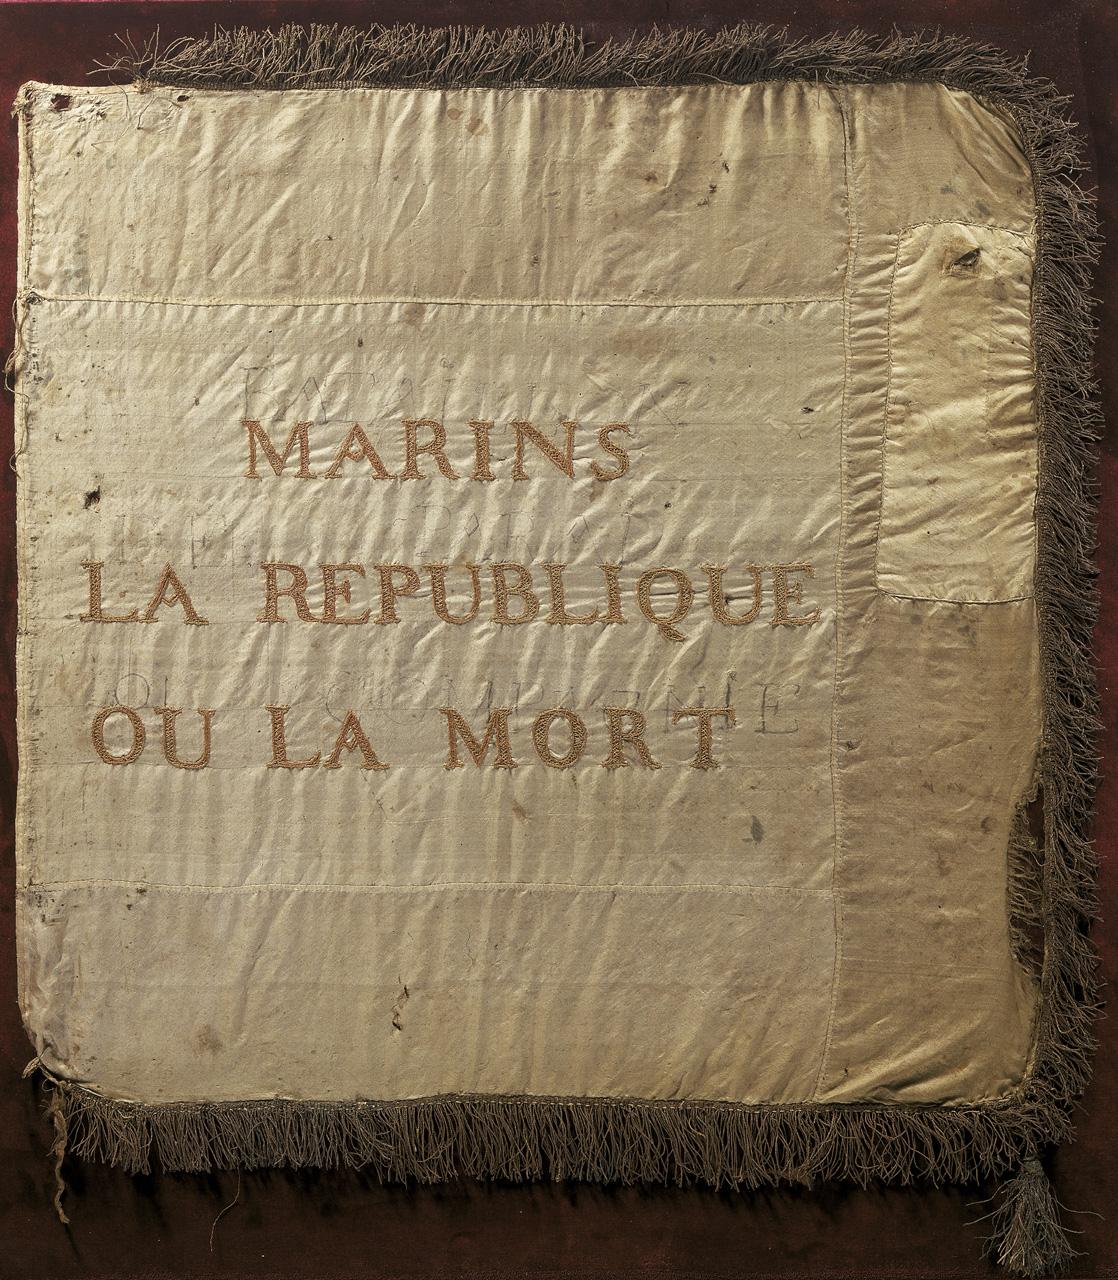 French republican banner captured during the Battle of the Glorious First of June 1794